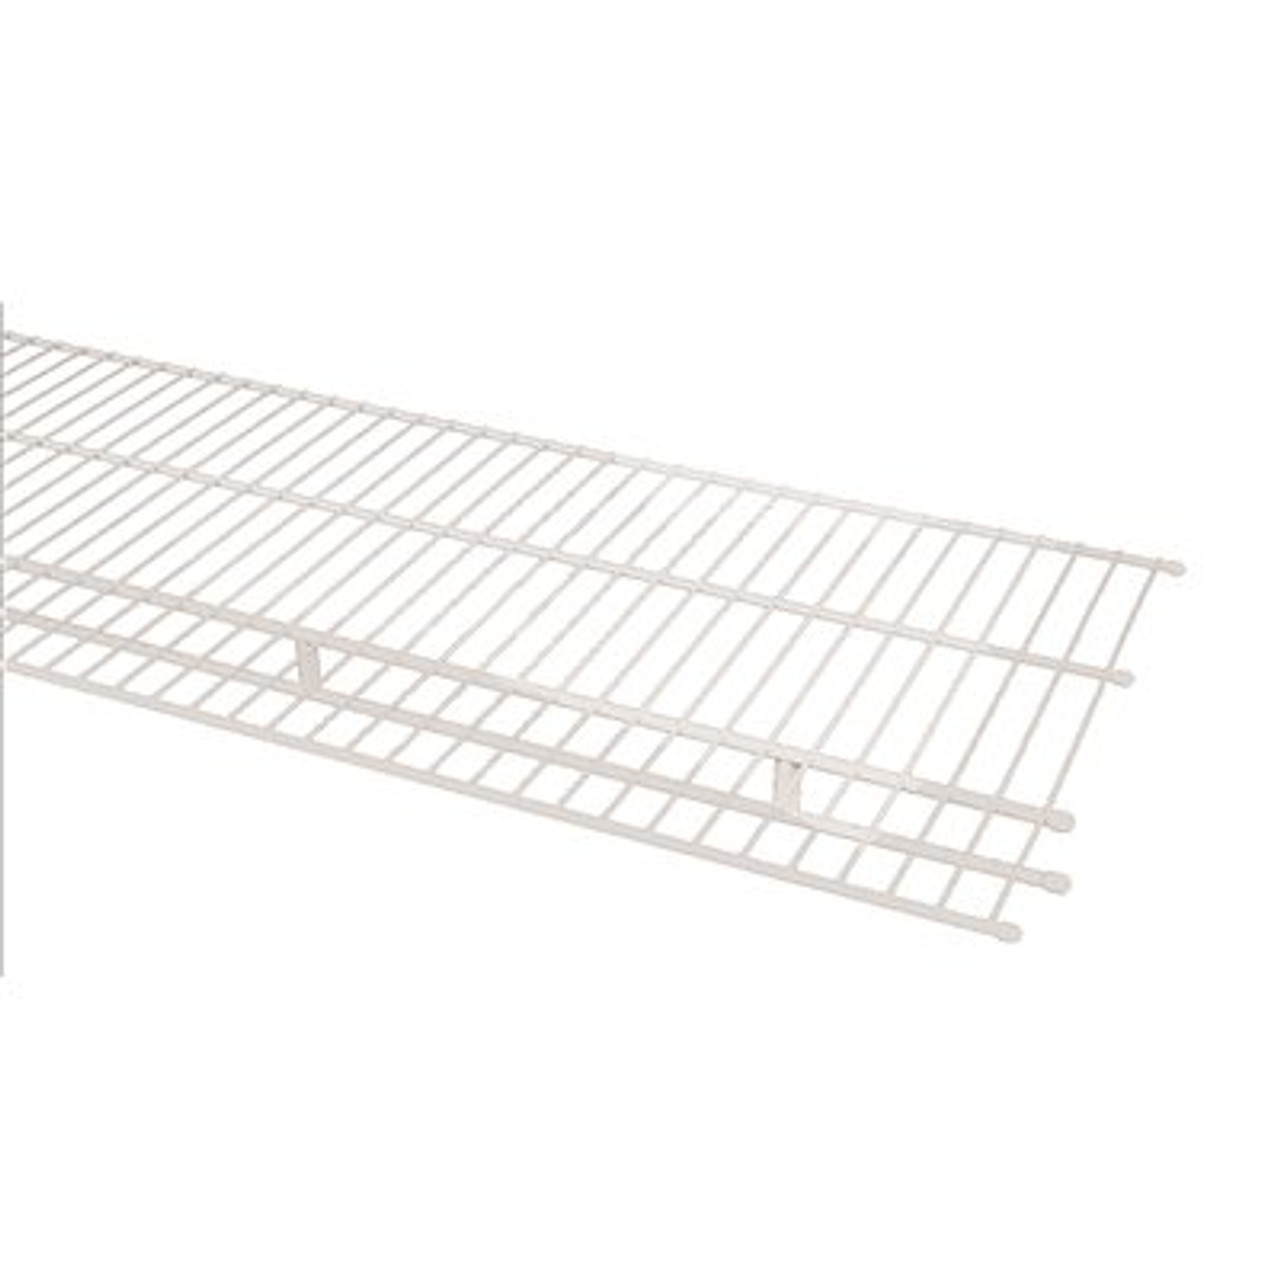 Closetmaid 16 In. X 144 In. X 1.875 In. Steel Ventilated Wire Shelf And Rod